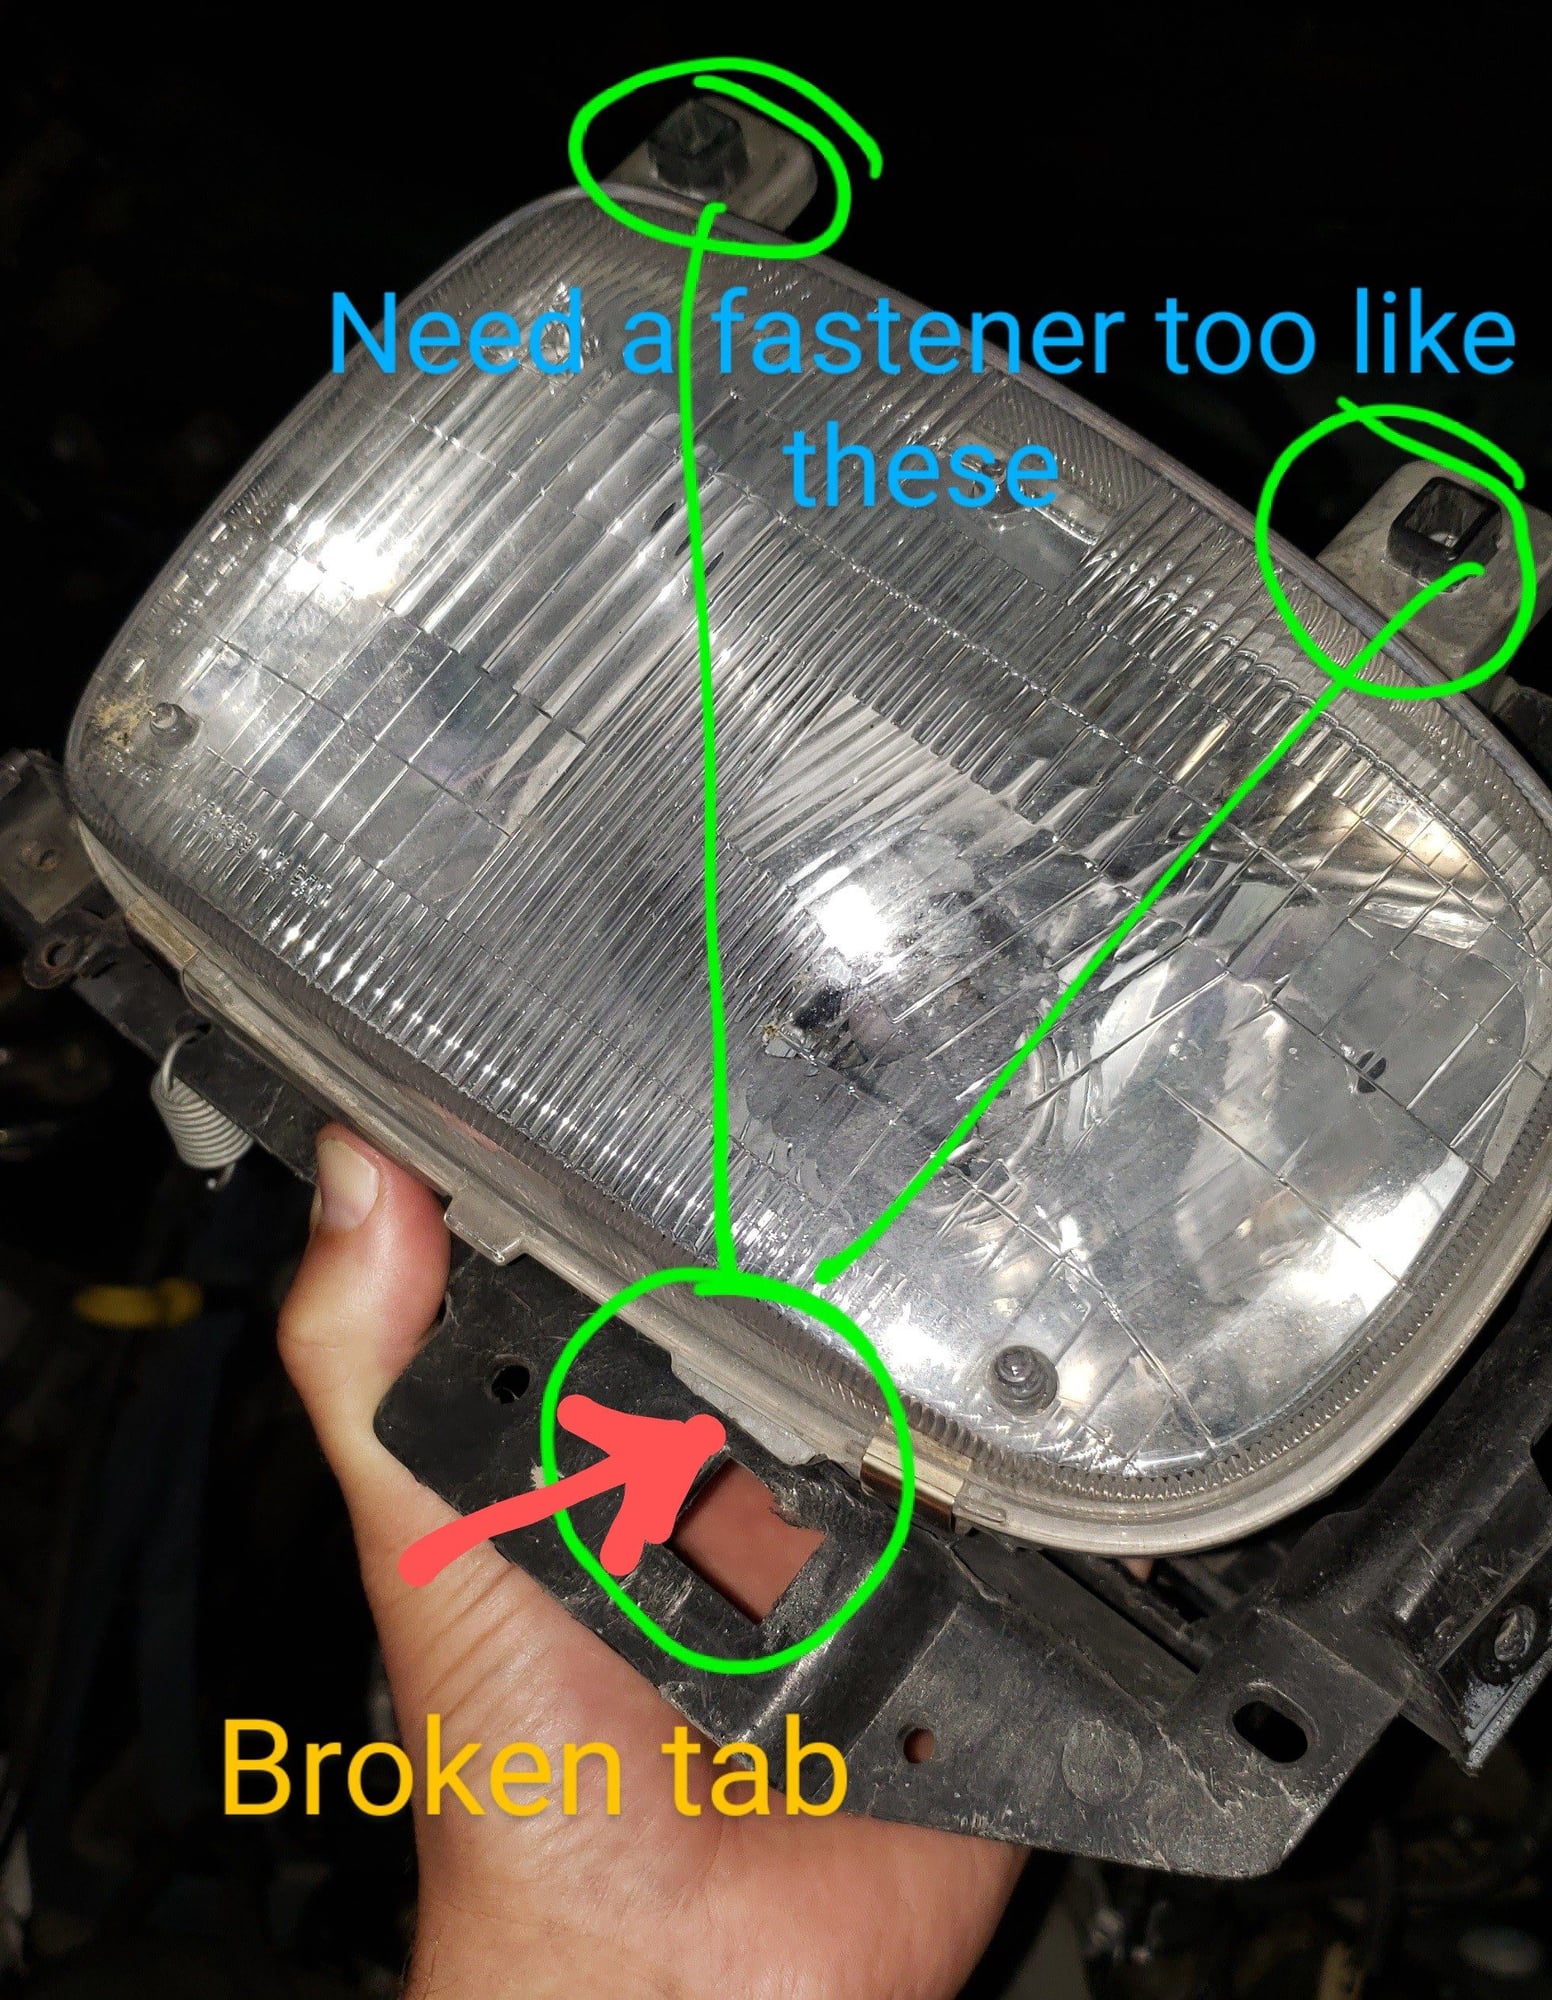 Lights - WTB: Headlight - Driver's Side (LHD) - Used - 1993 to 1995 Mazda RX-7 - South Lyon, MI 48178, United States